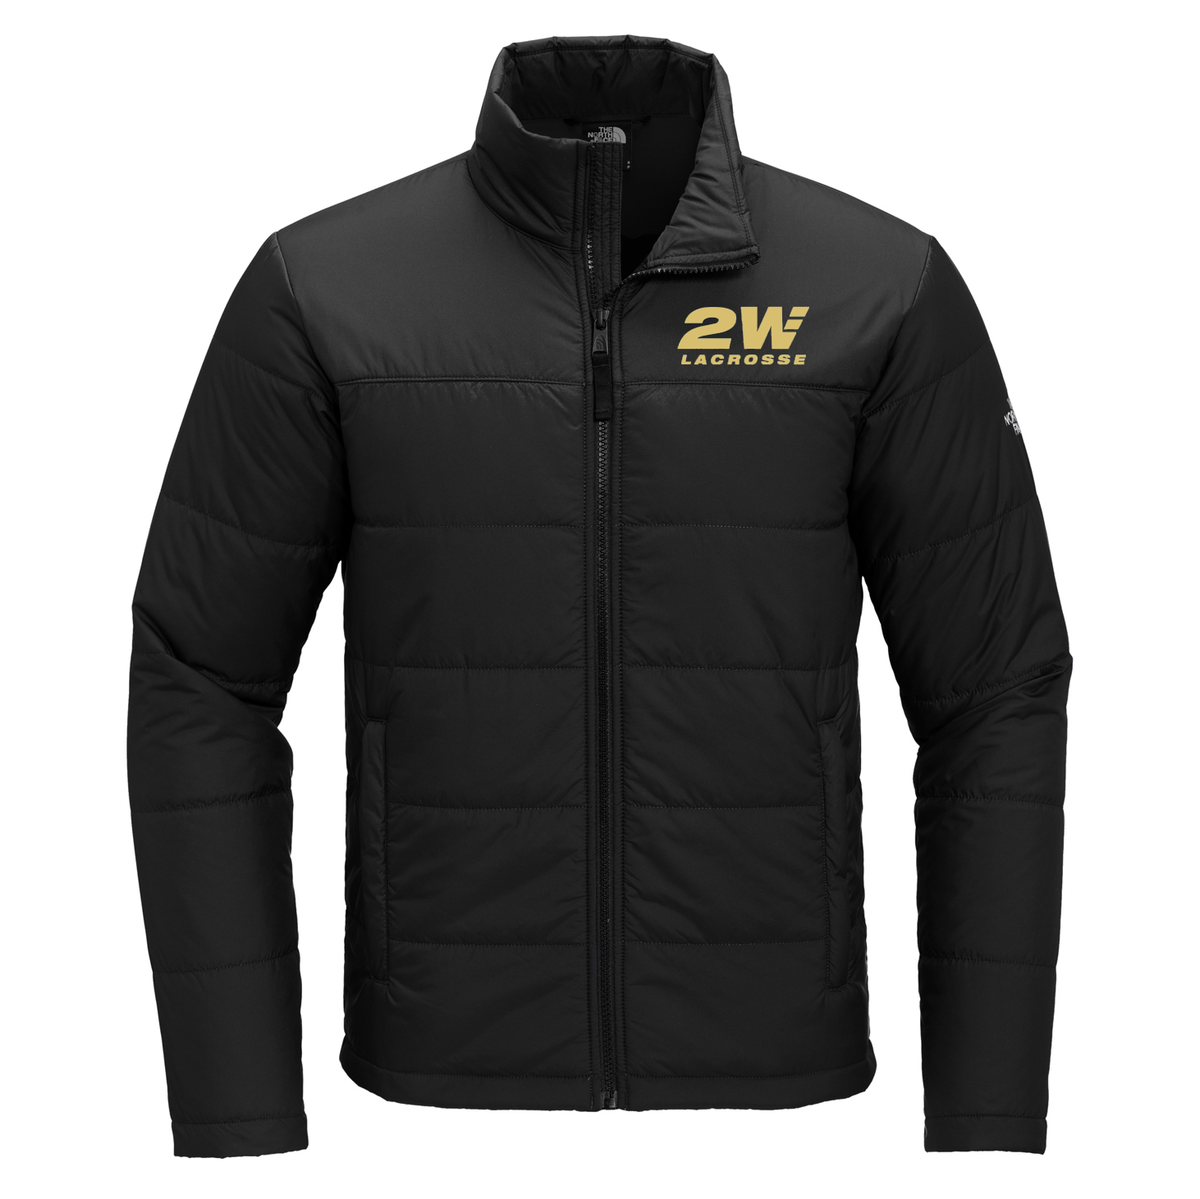 2Way Lacrosse North The North Face® Everyday Insulated Jacket